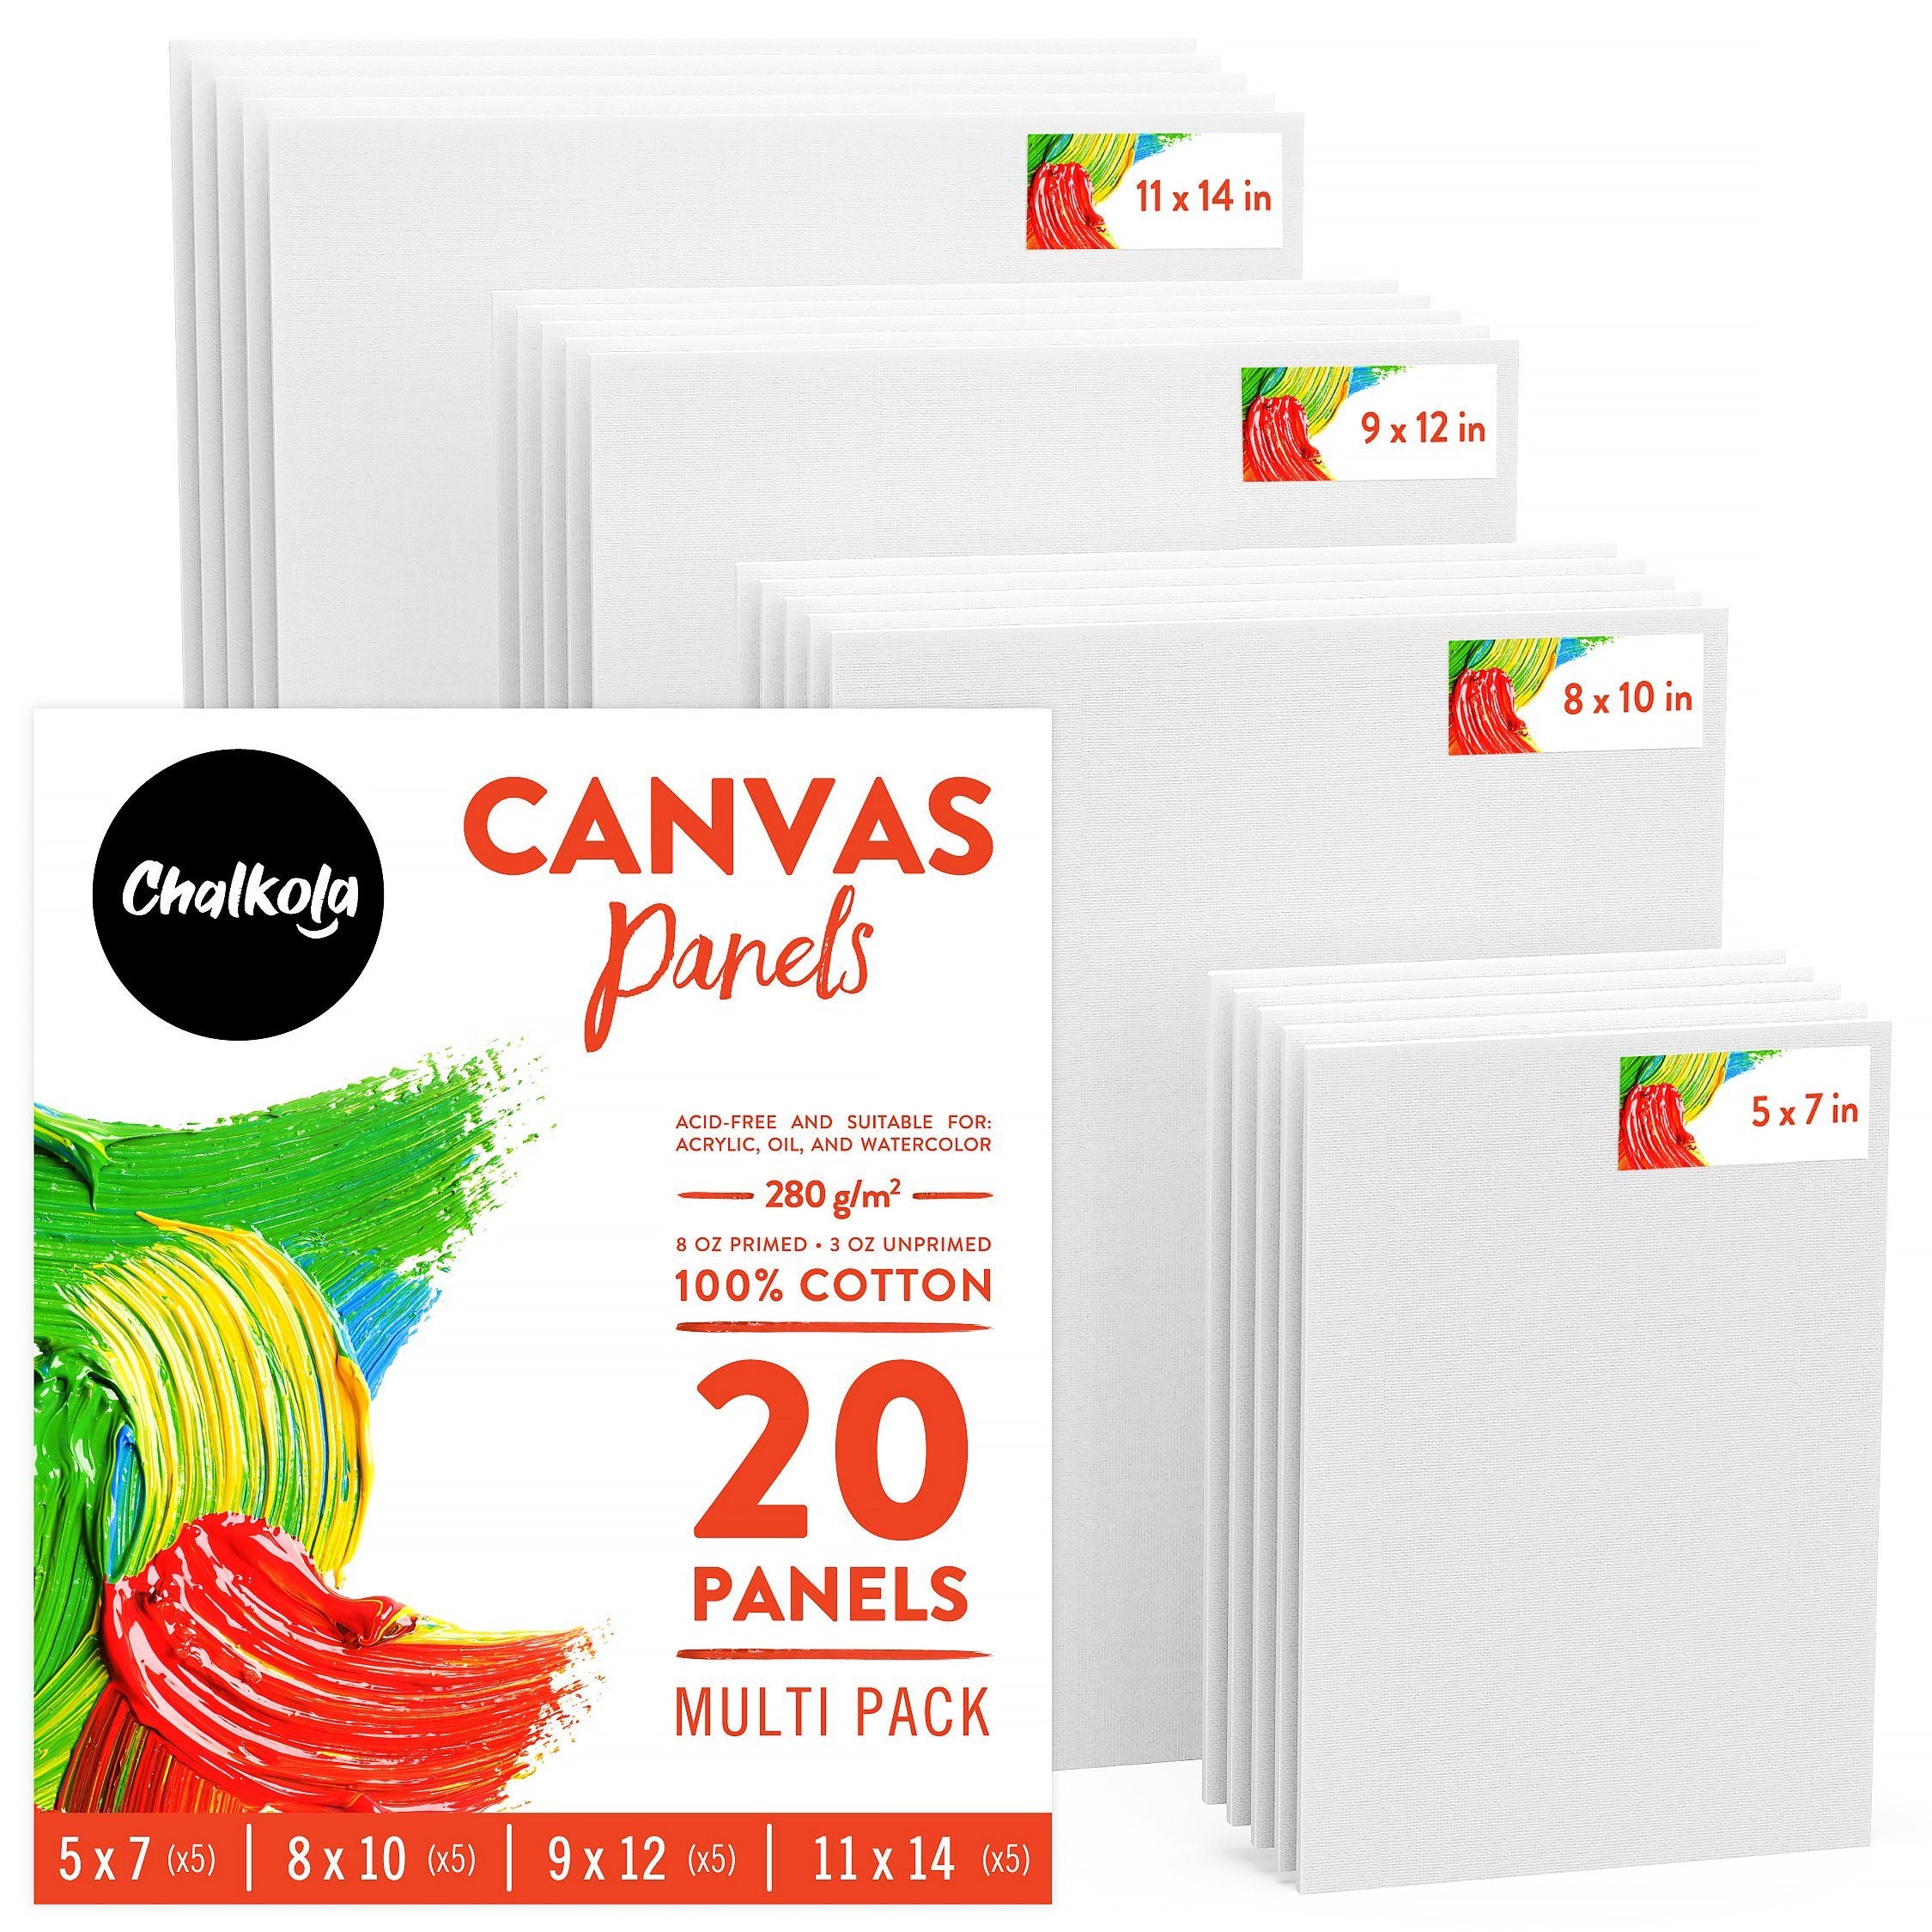 Chalkola Black Canvas for Painting - 24 Pack Canvas Panels - 4x6, 5x7, 8x10, 9x12, 11x14, 12x16 inch (4 Each) - Canvases Are 100% Cotton, Primed, Acid